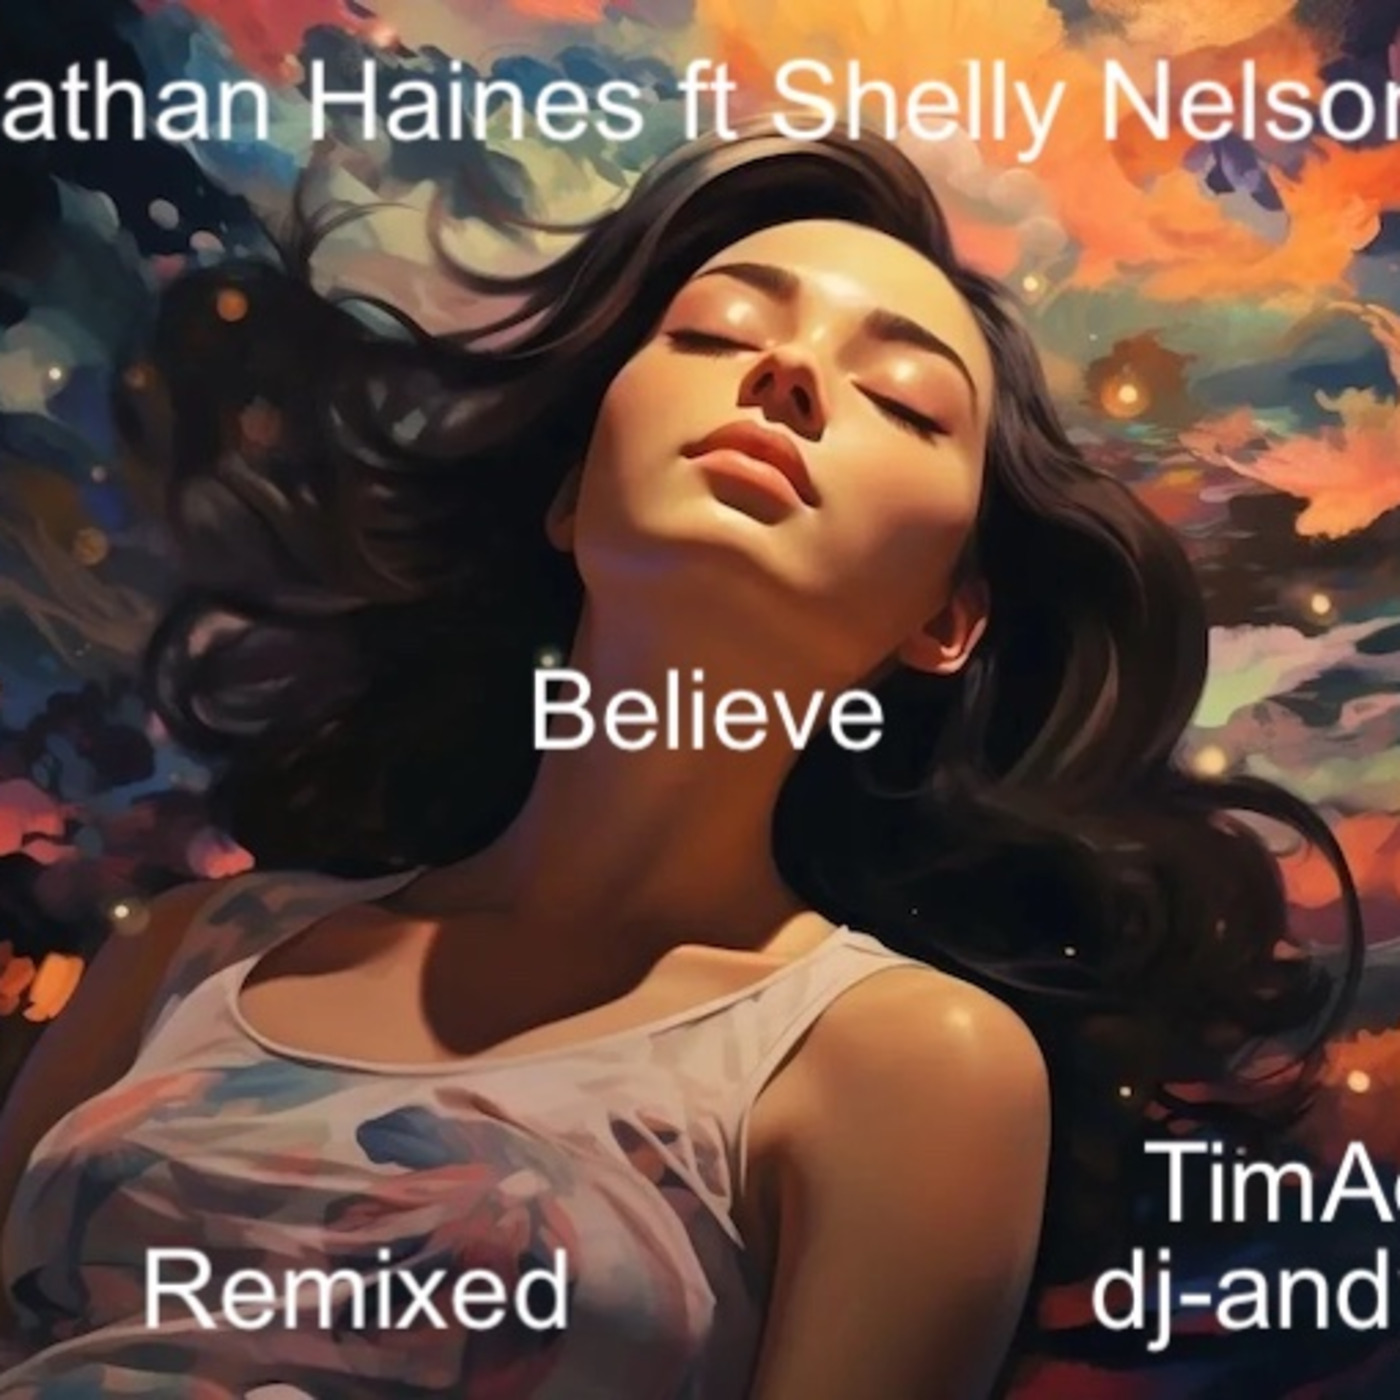 Episode 251: Nathan Haines ft Shelly Nelson (Remixed dj-andy-bee)